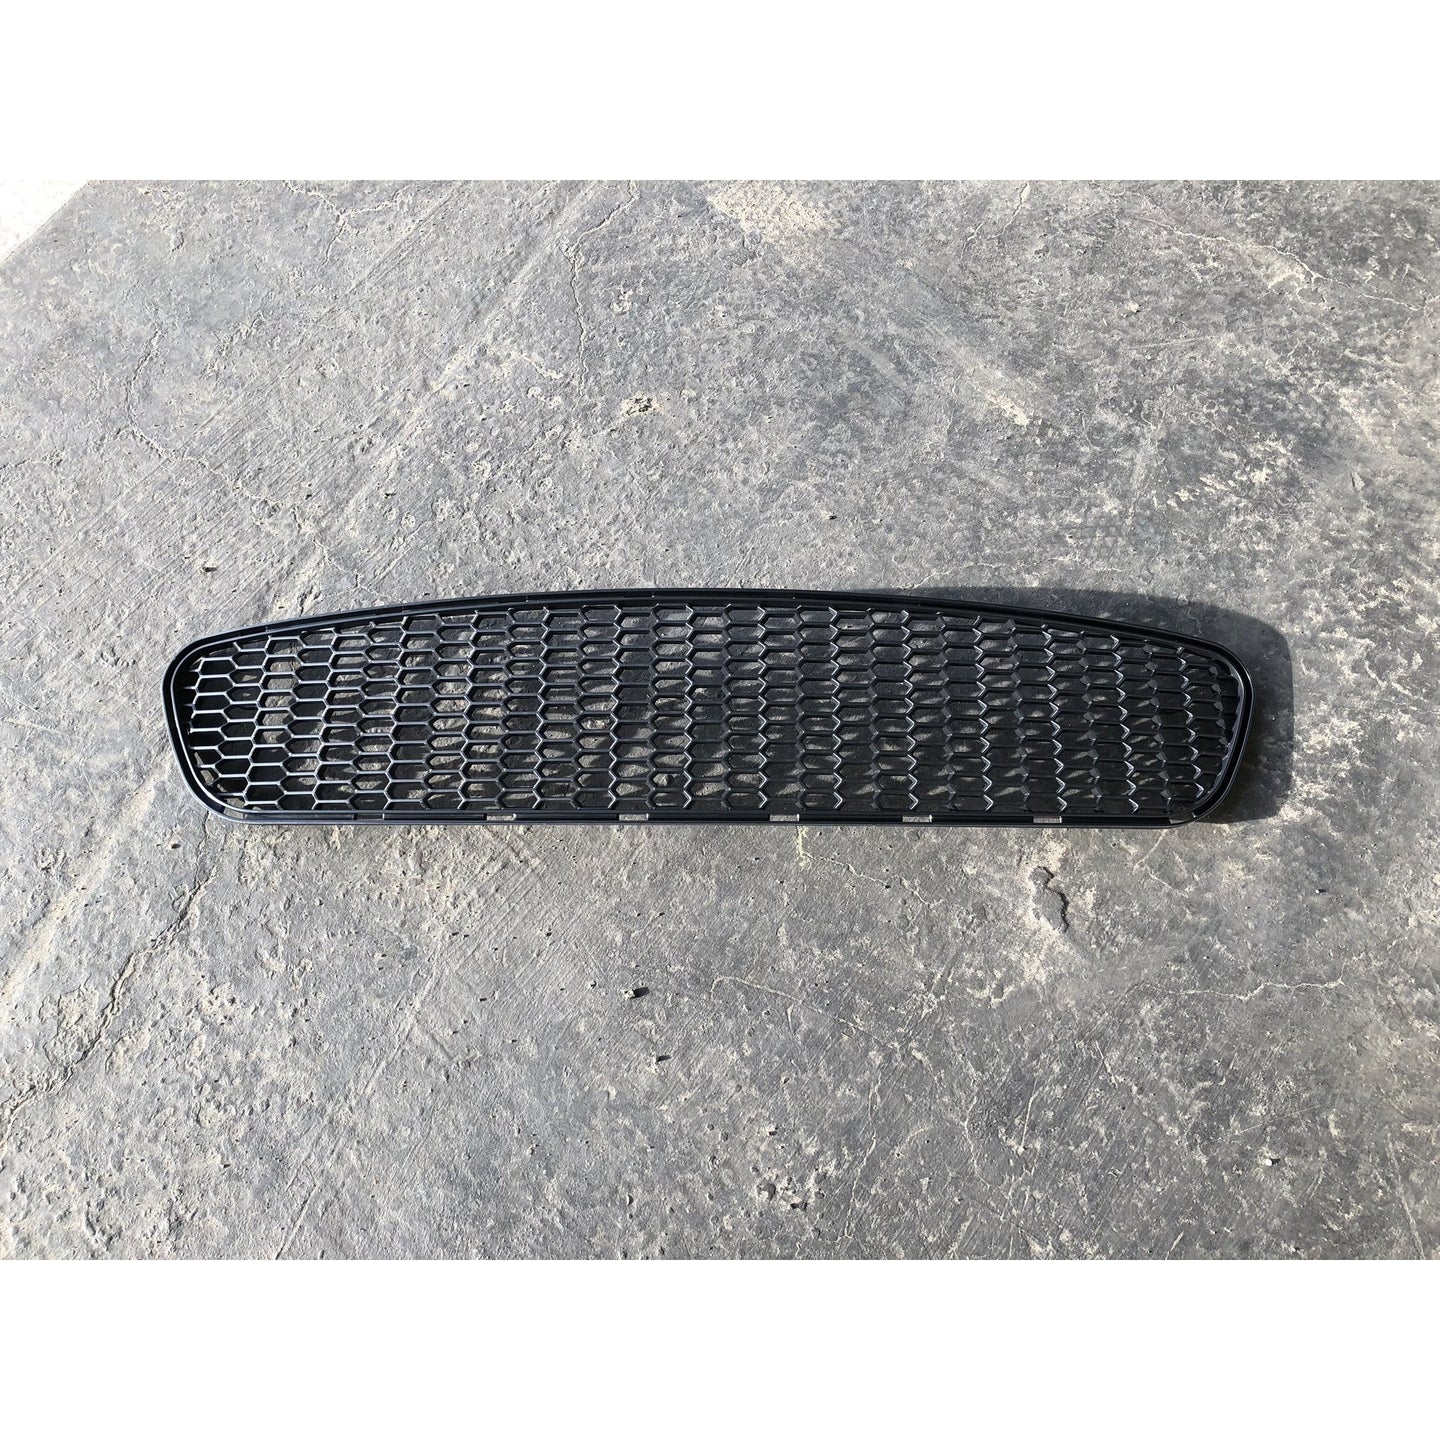 BMW F10 REPLACEMENT CENTER MESH GRILLE FOR M5 STYLE FRONT BUMPER - AEUROPLUG